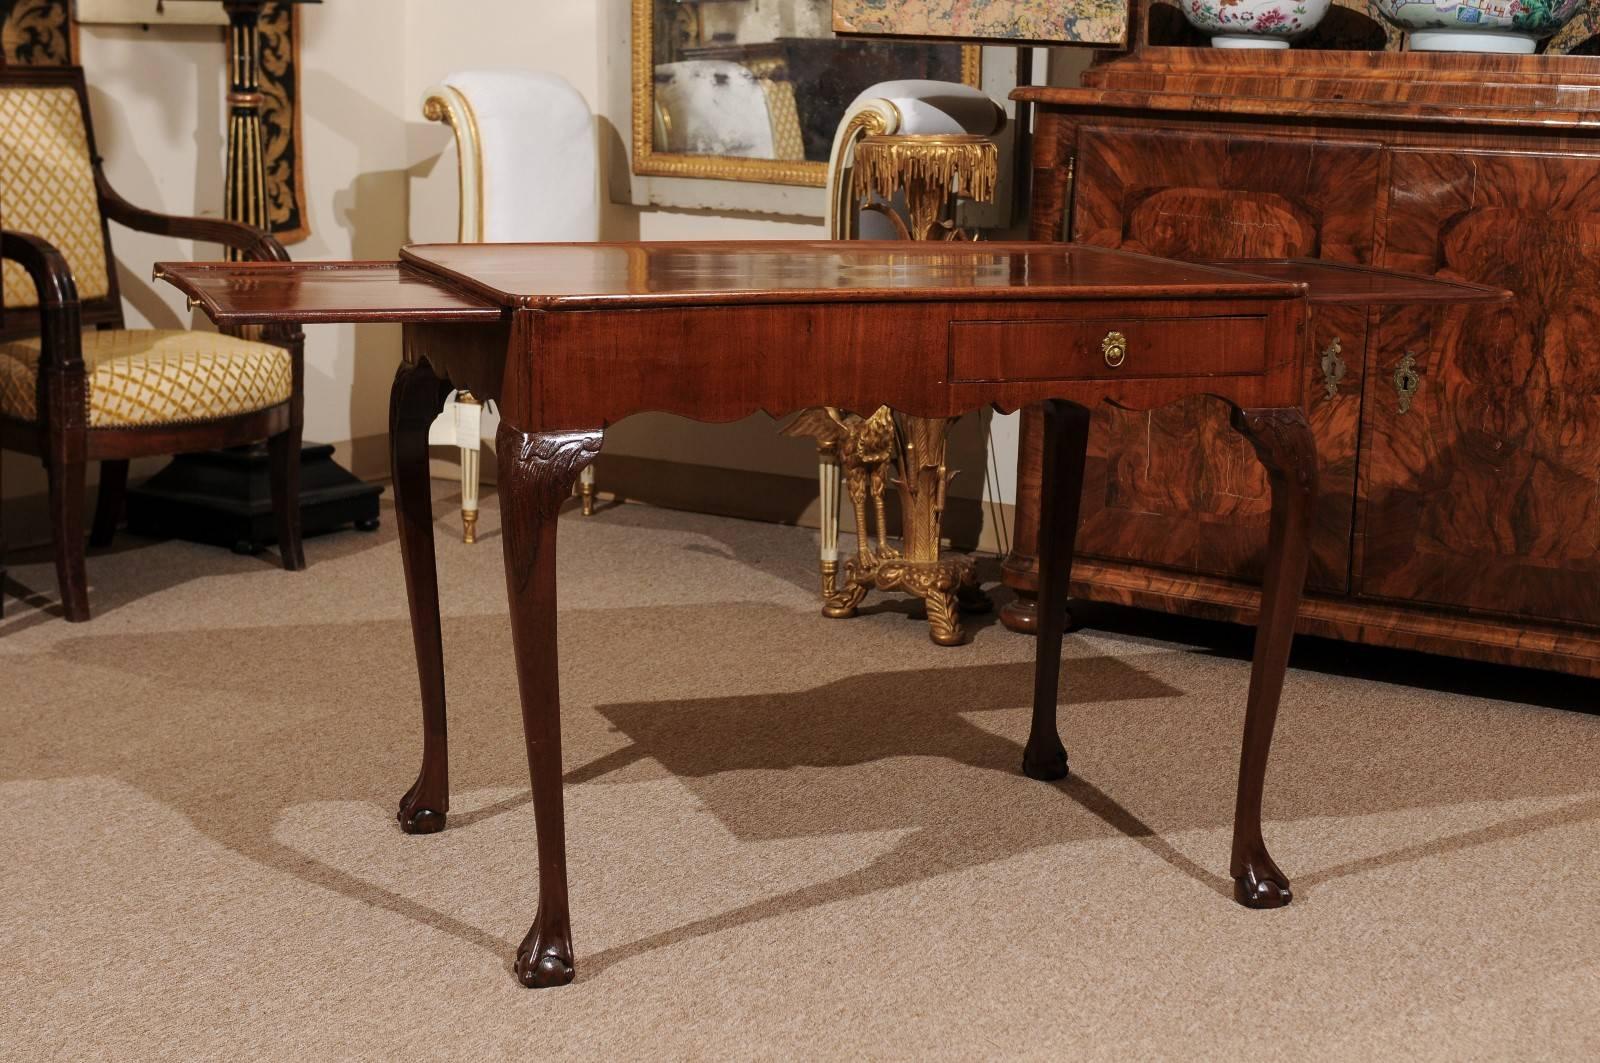 A George III mahogany tea table featuring 2 slides, drawers, cabriole leg ending in ball and claw feet.